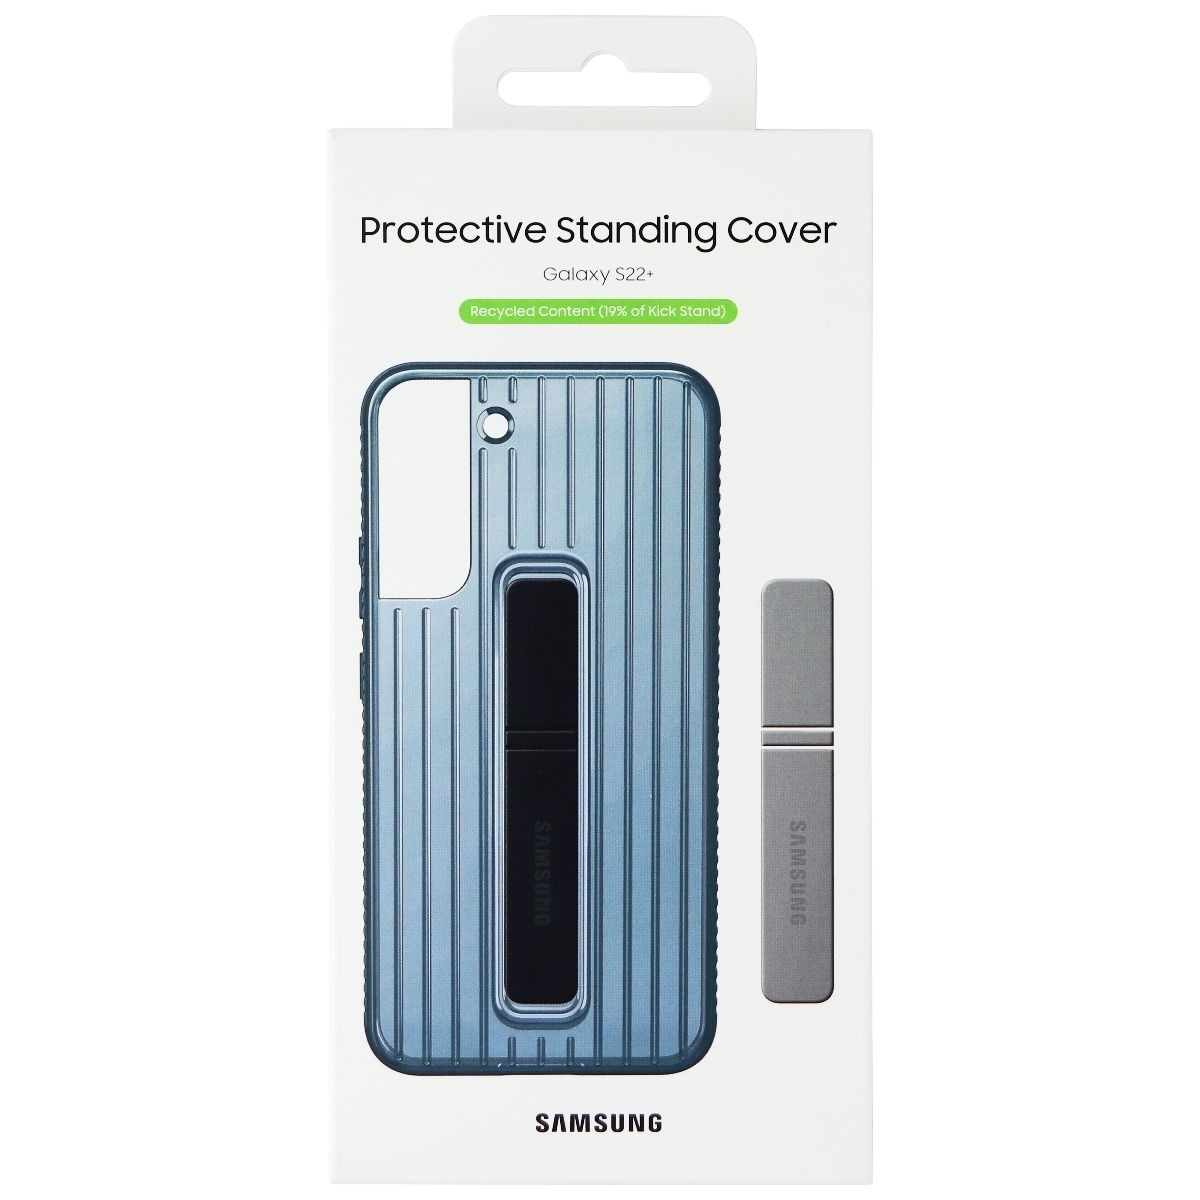 UPC 887276632452 product image for Samsung Protective Standing Cover for Samsung Galaxy (S22+) - Navy | upcitemdb.com